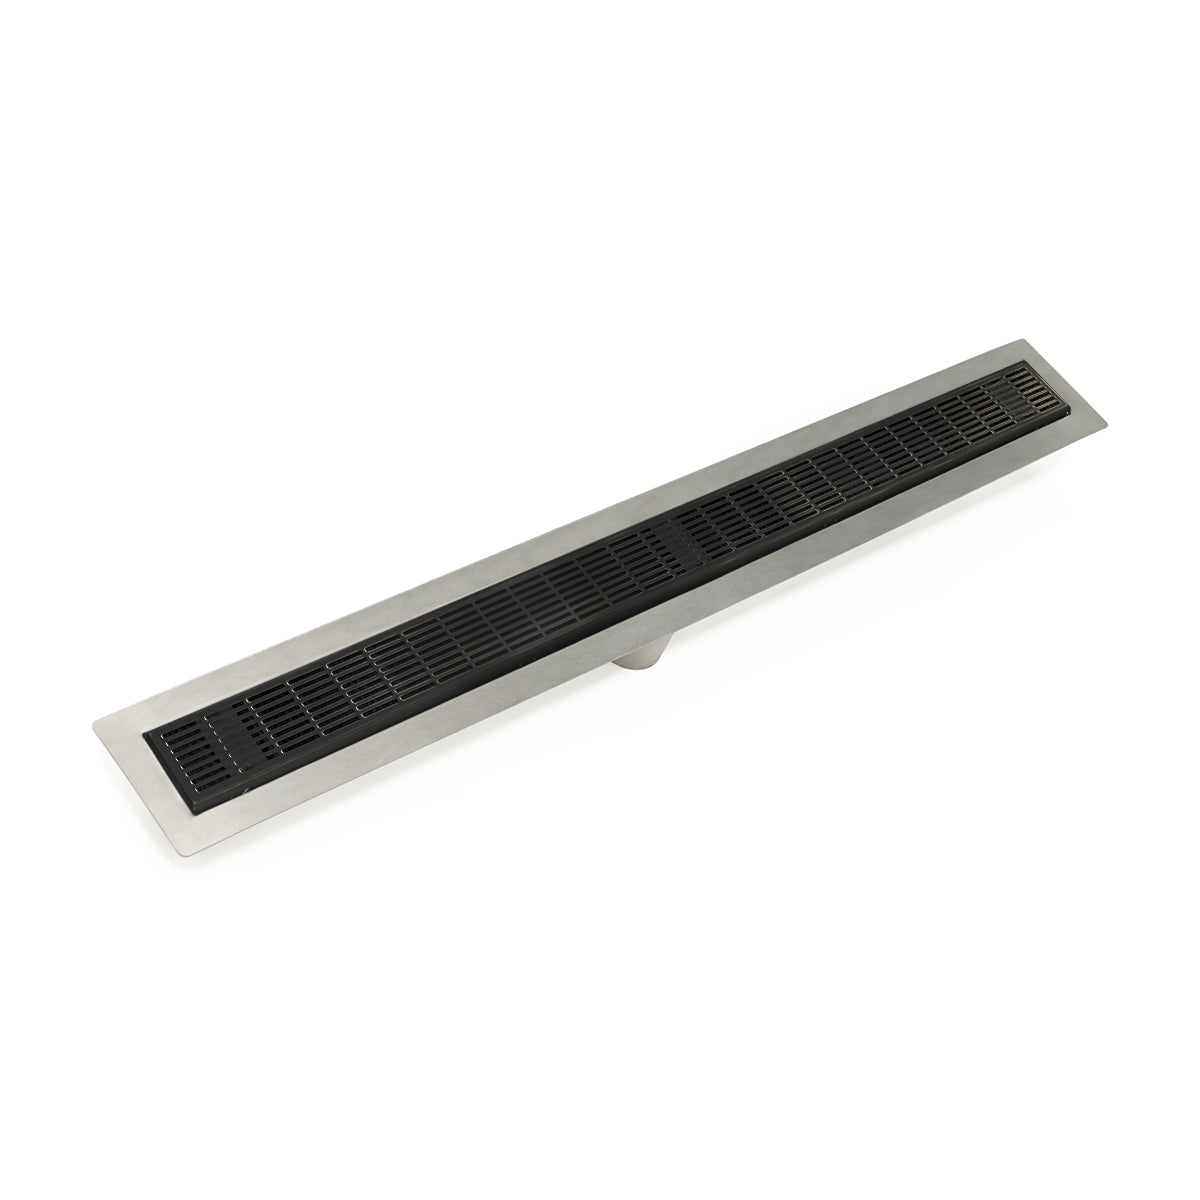 Infinity Drain 60" FF Series Fixed Flange Linear Drain Kit with 2 1/2" Perforated Slotted Grate